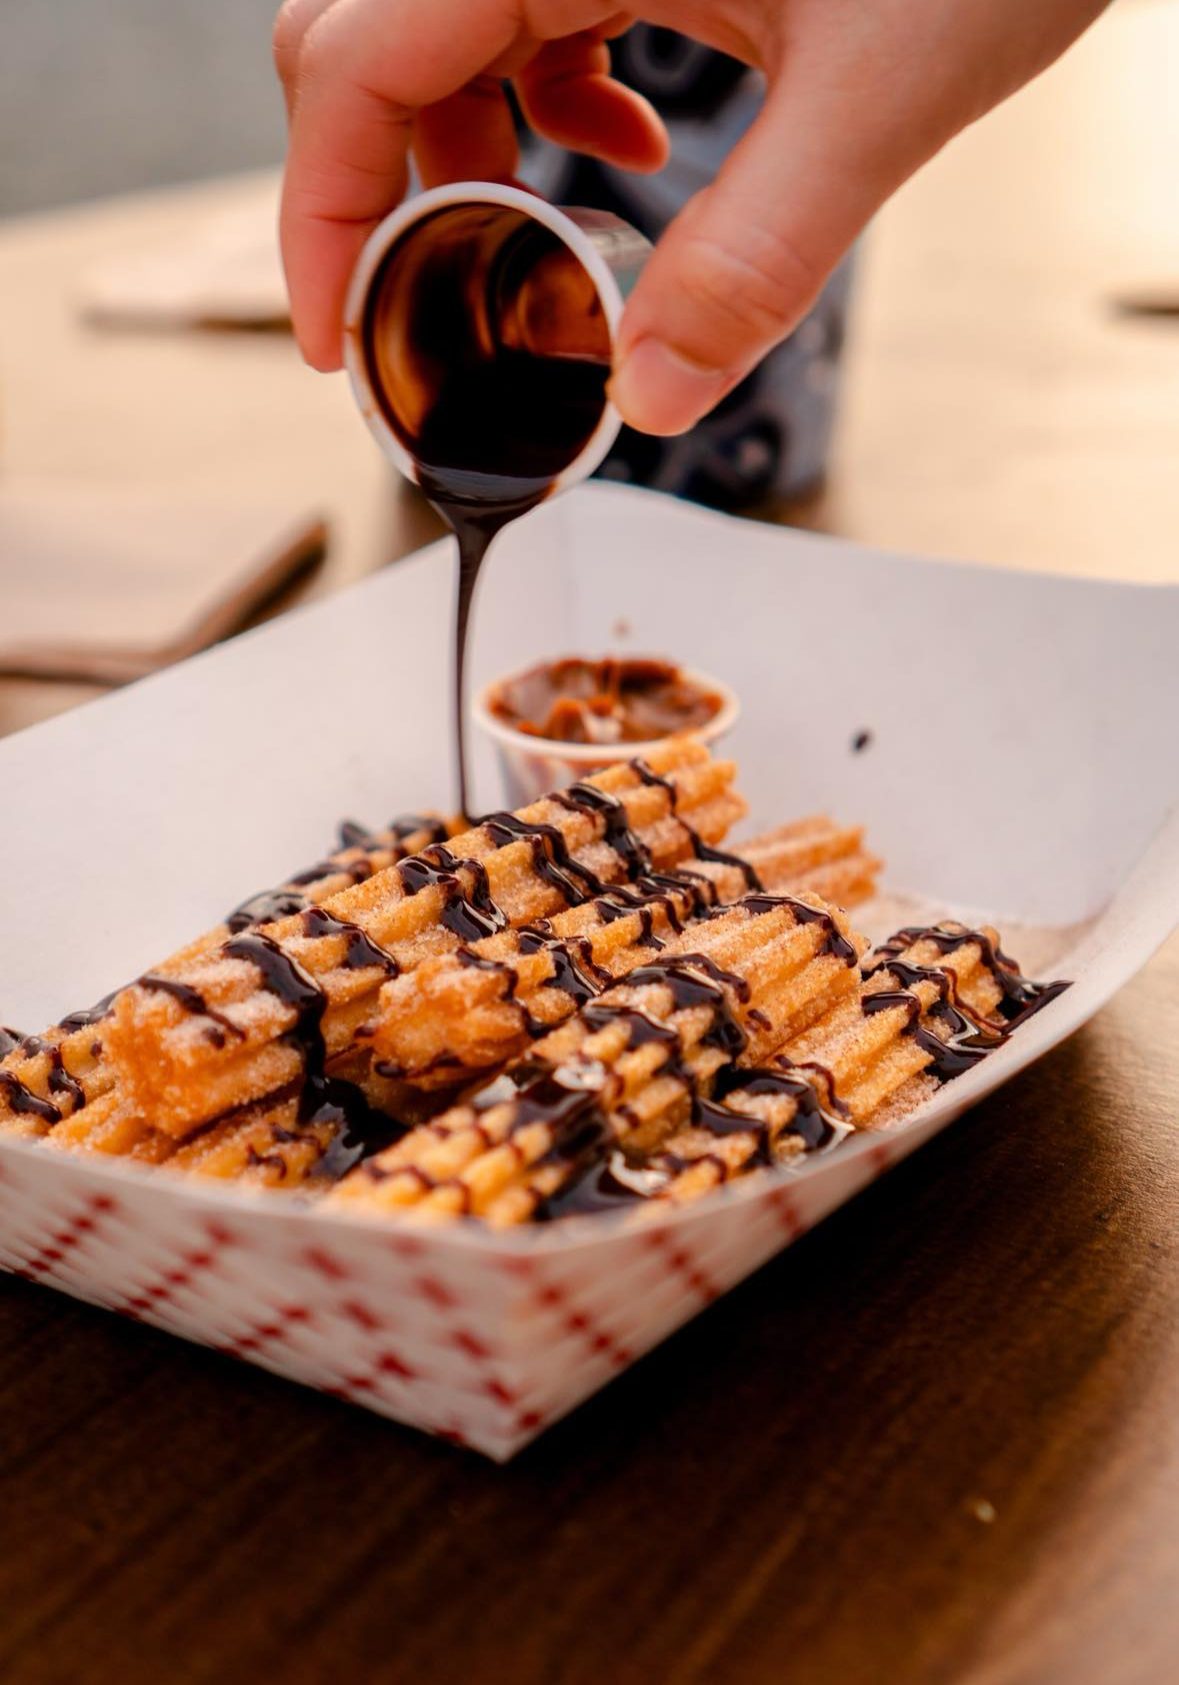 A person drizzling chocolate sauce on a plate of churros.